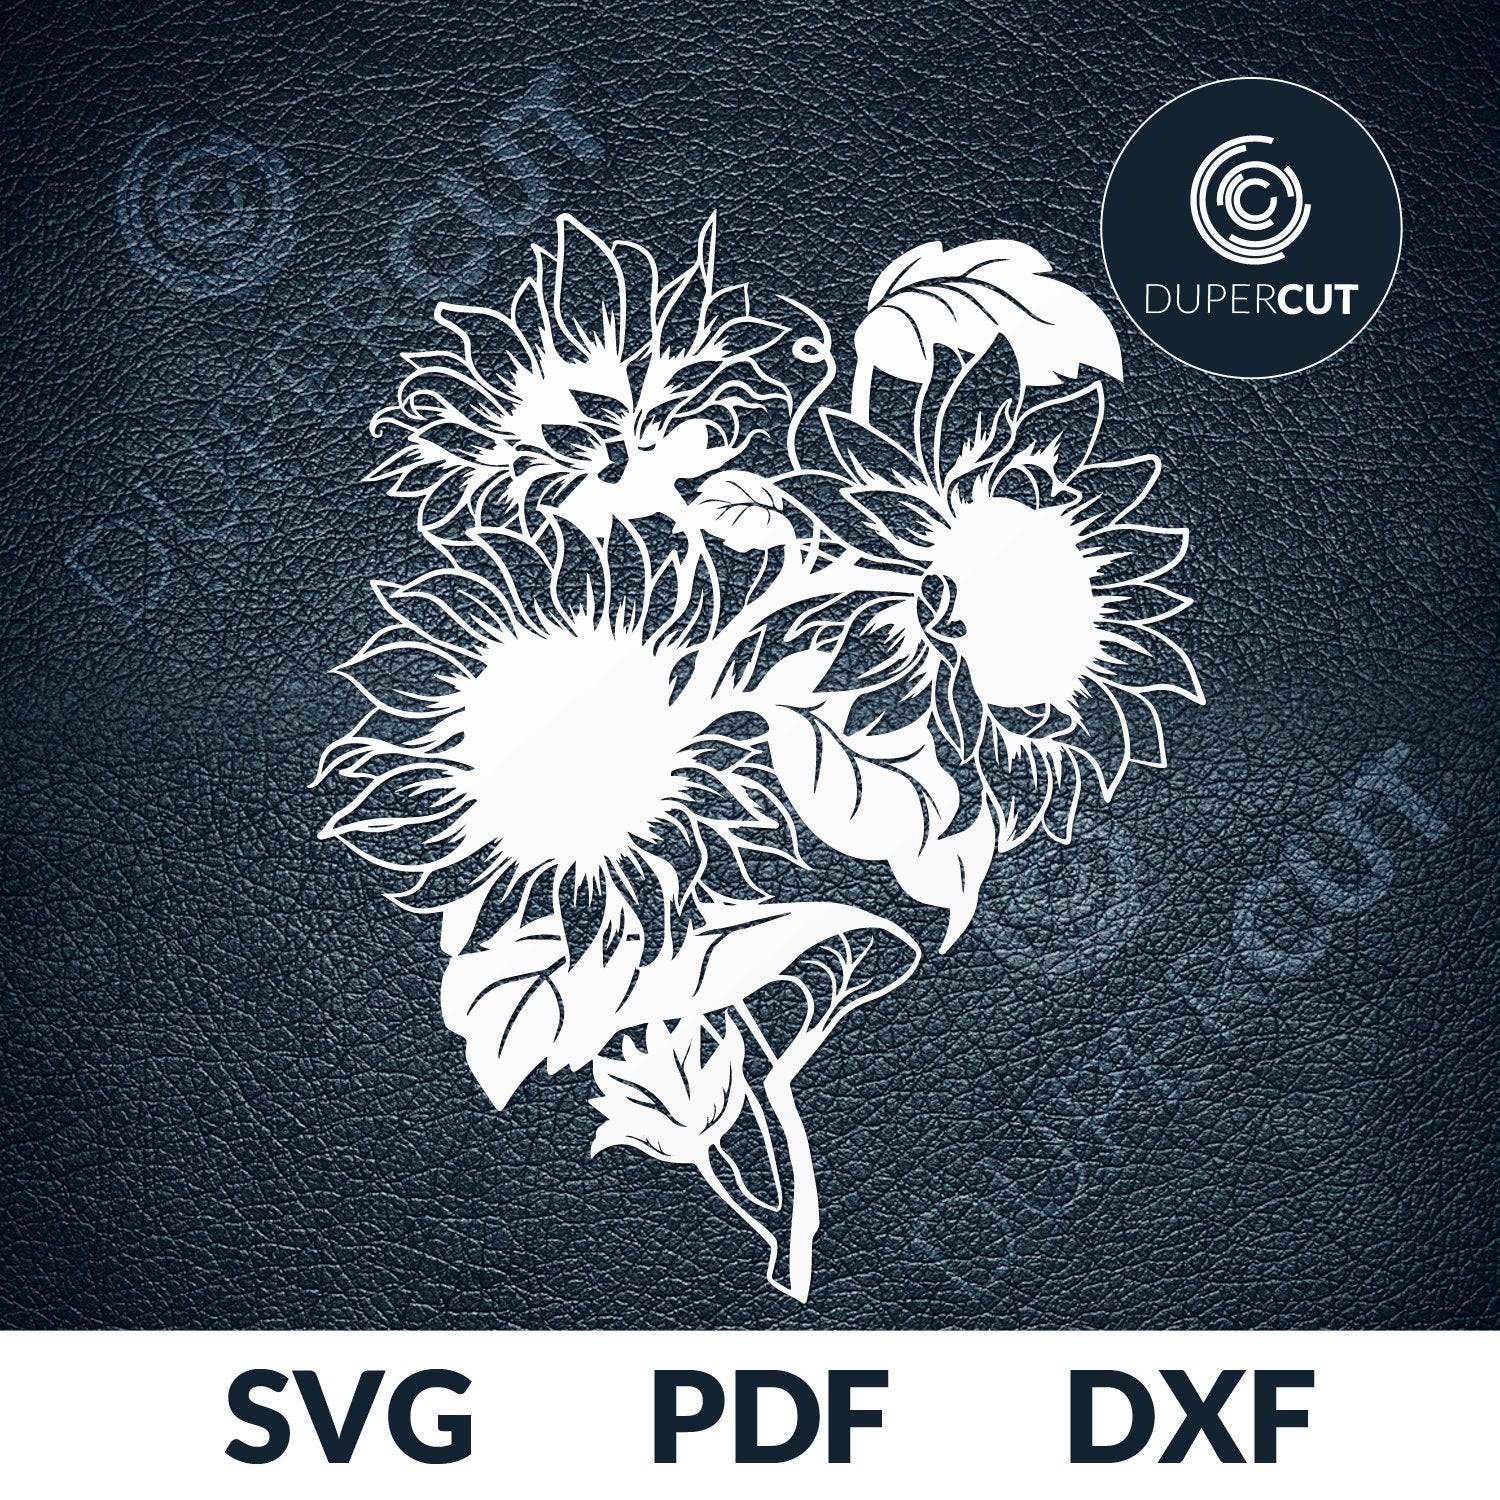 Sunflowers detailed vector  template - SVG DXF PNG files for Cricut, Glowforge, Silhouette Cameo, CNC Machines